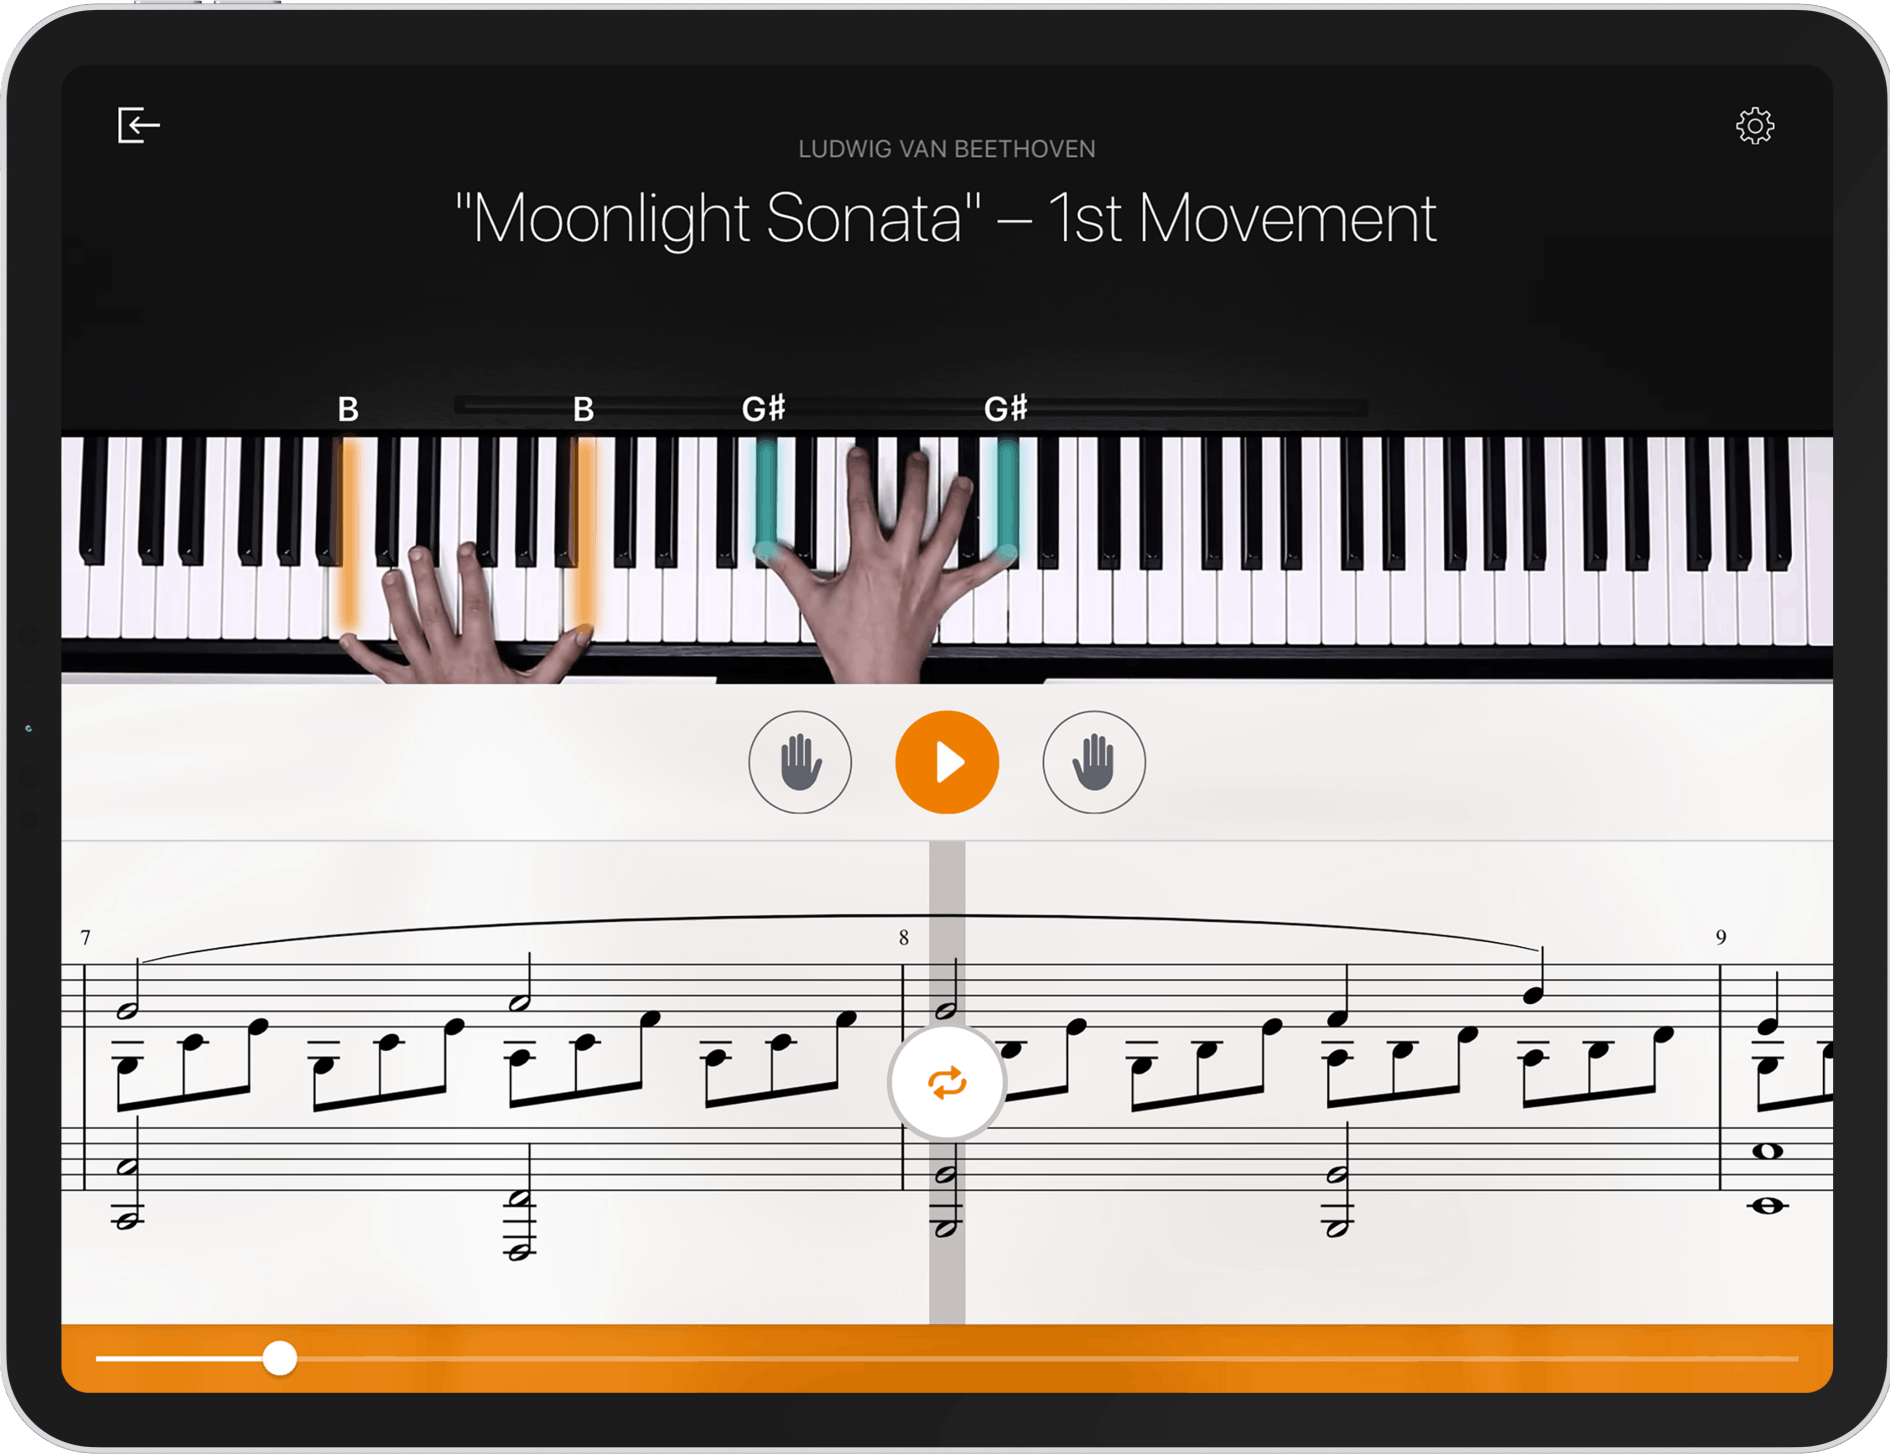 Free Online Classical Piano Lessons